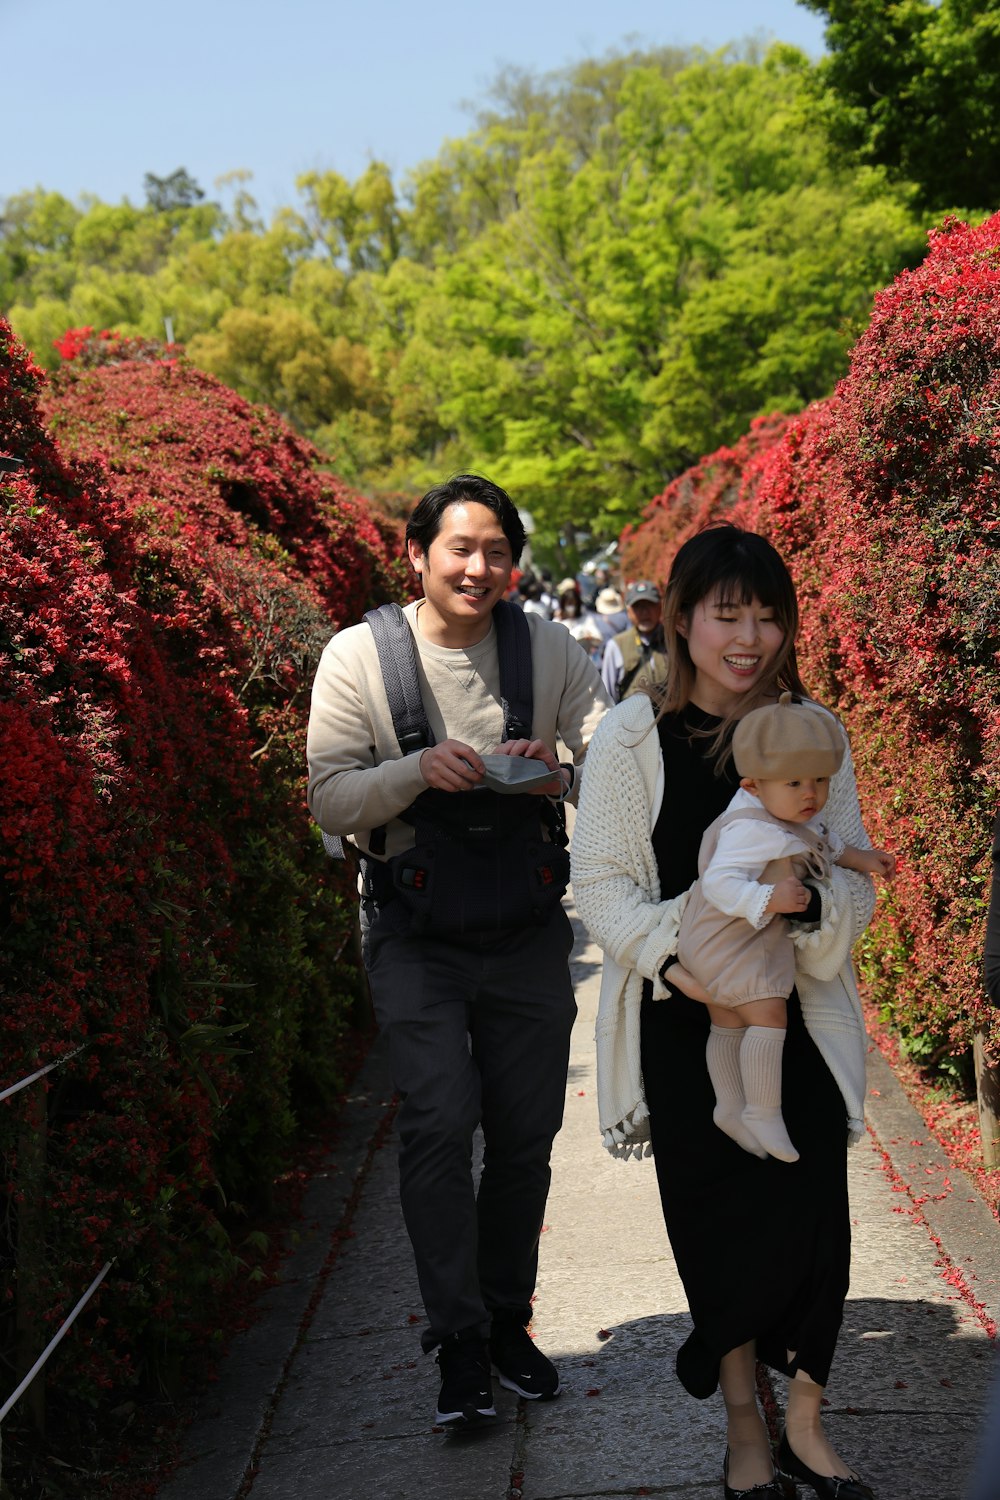 a man and a woman walking down a sidewalk holding a baby